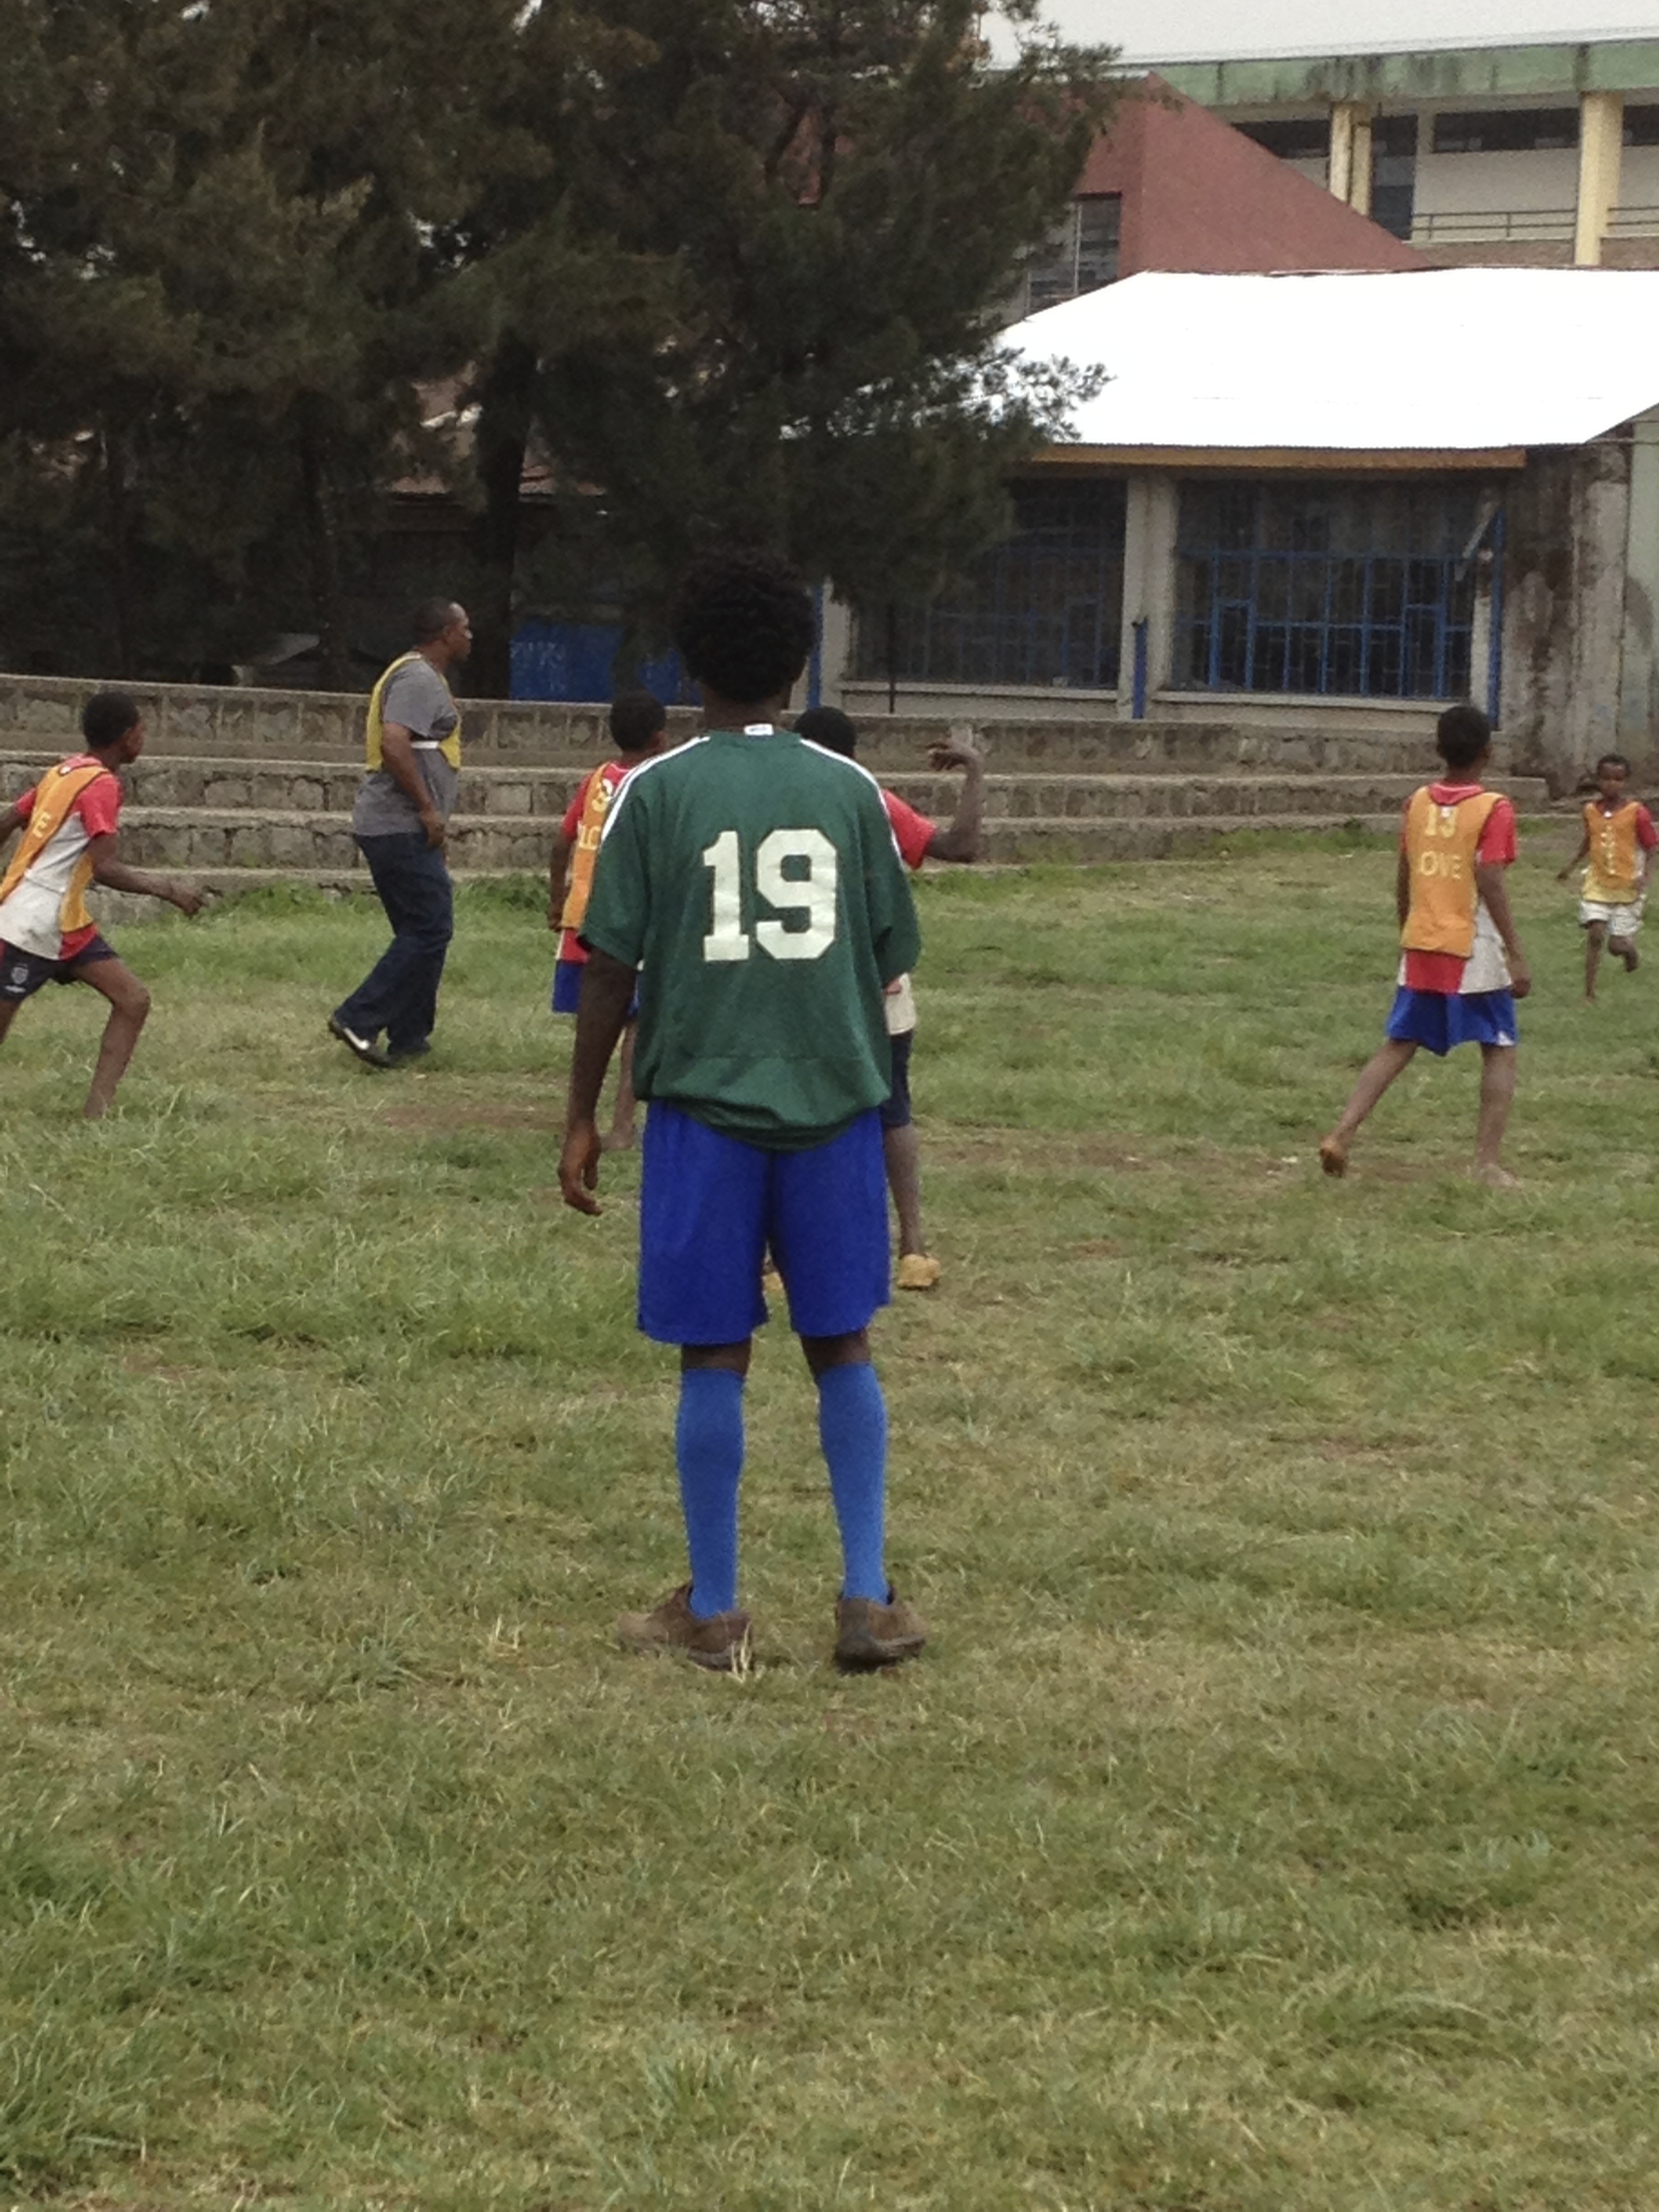 Nega playing soccer with boys during my visit to Ethiopia in June